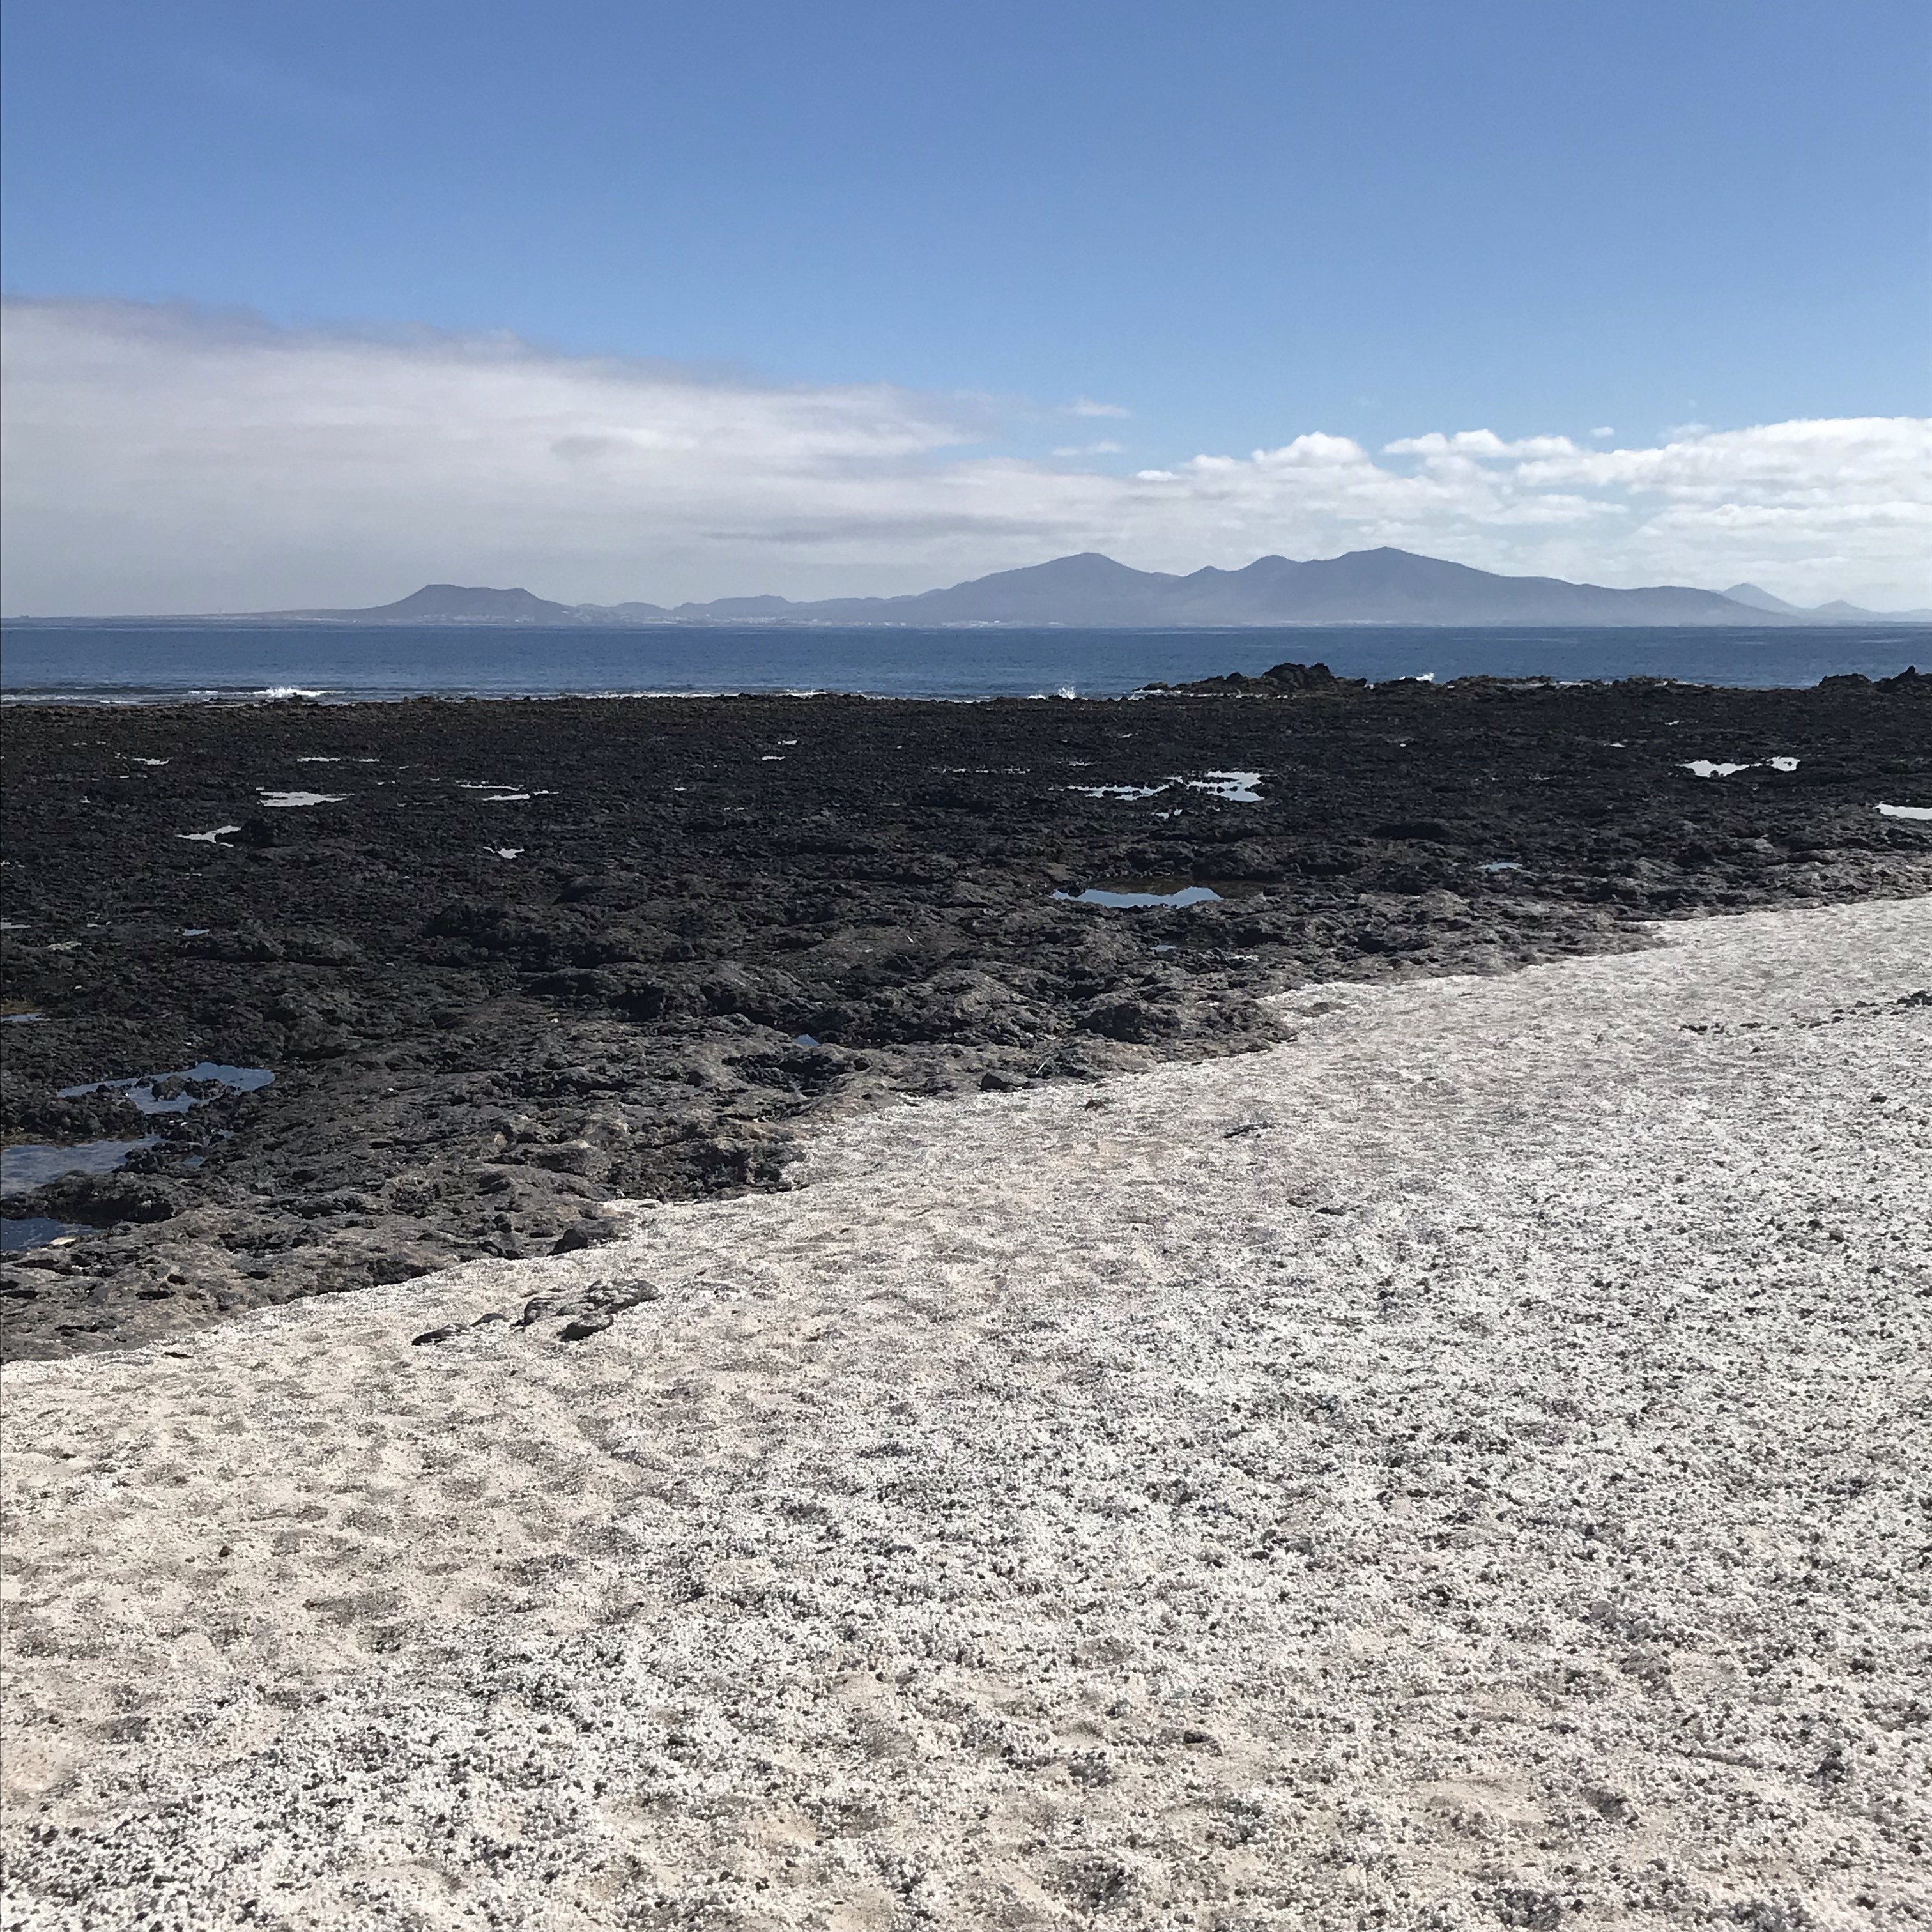 This amazing beach has lots of skeletal calcium carbonate remains of Rhodoliths which is the white ‘stone’. It gives the appearance of popcorn which also gives the beach its name. The island in the distance is Lanzarote.